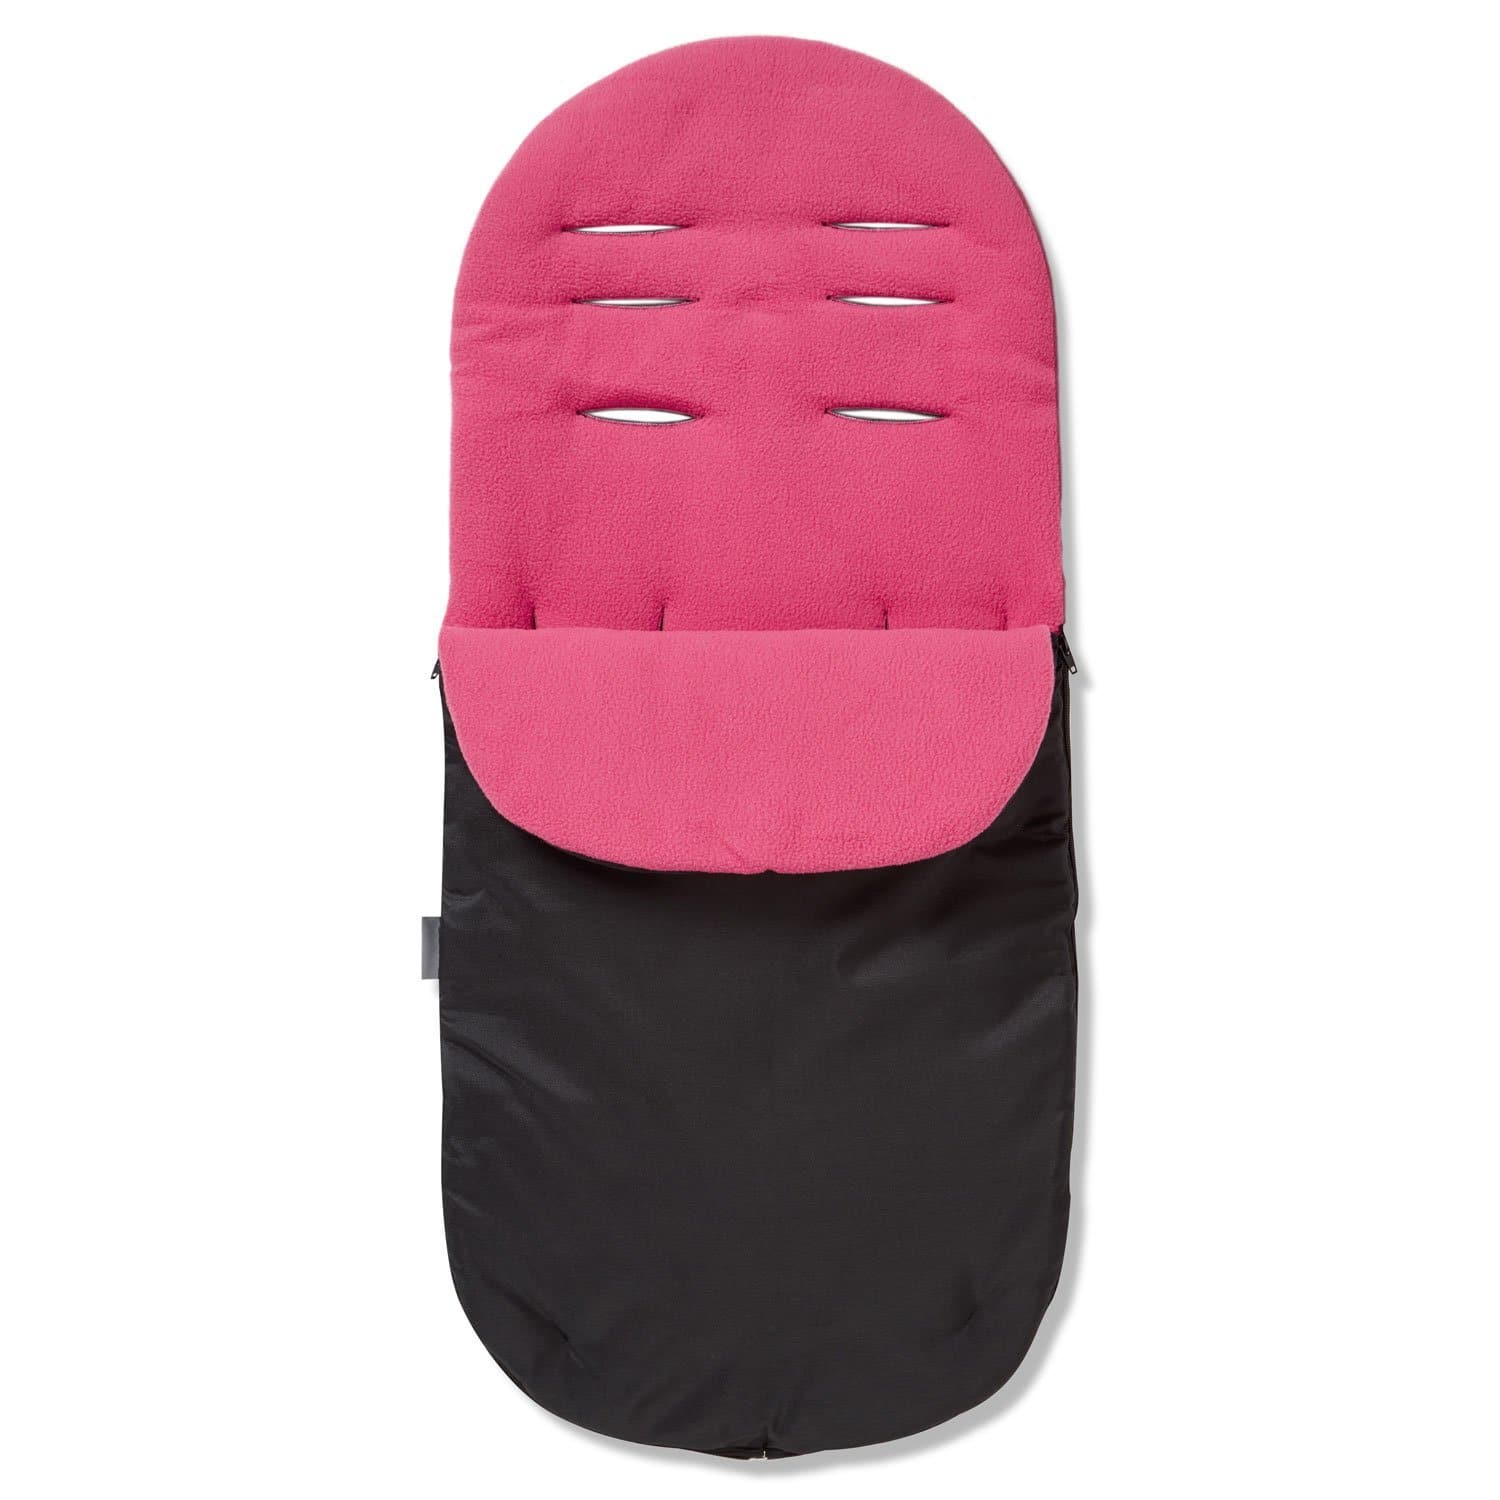 Footmuff / Cosy Toes Compatible with Joie - Dark Pink / Fits All Models | For Your Little One